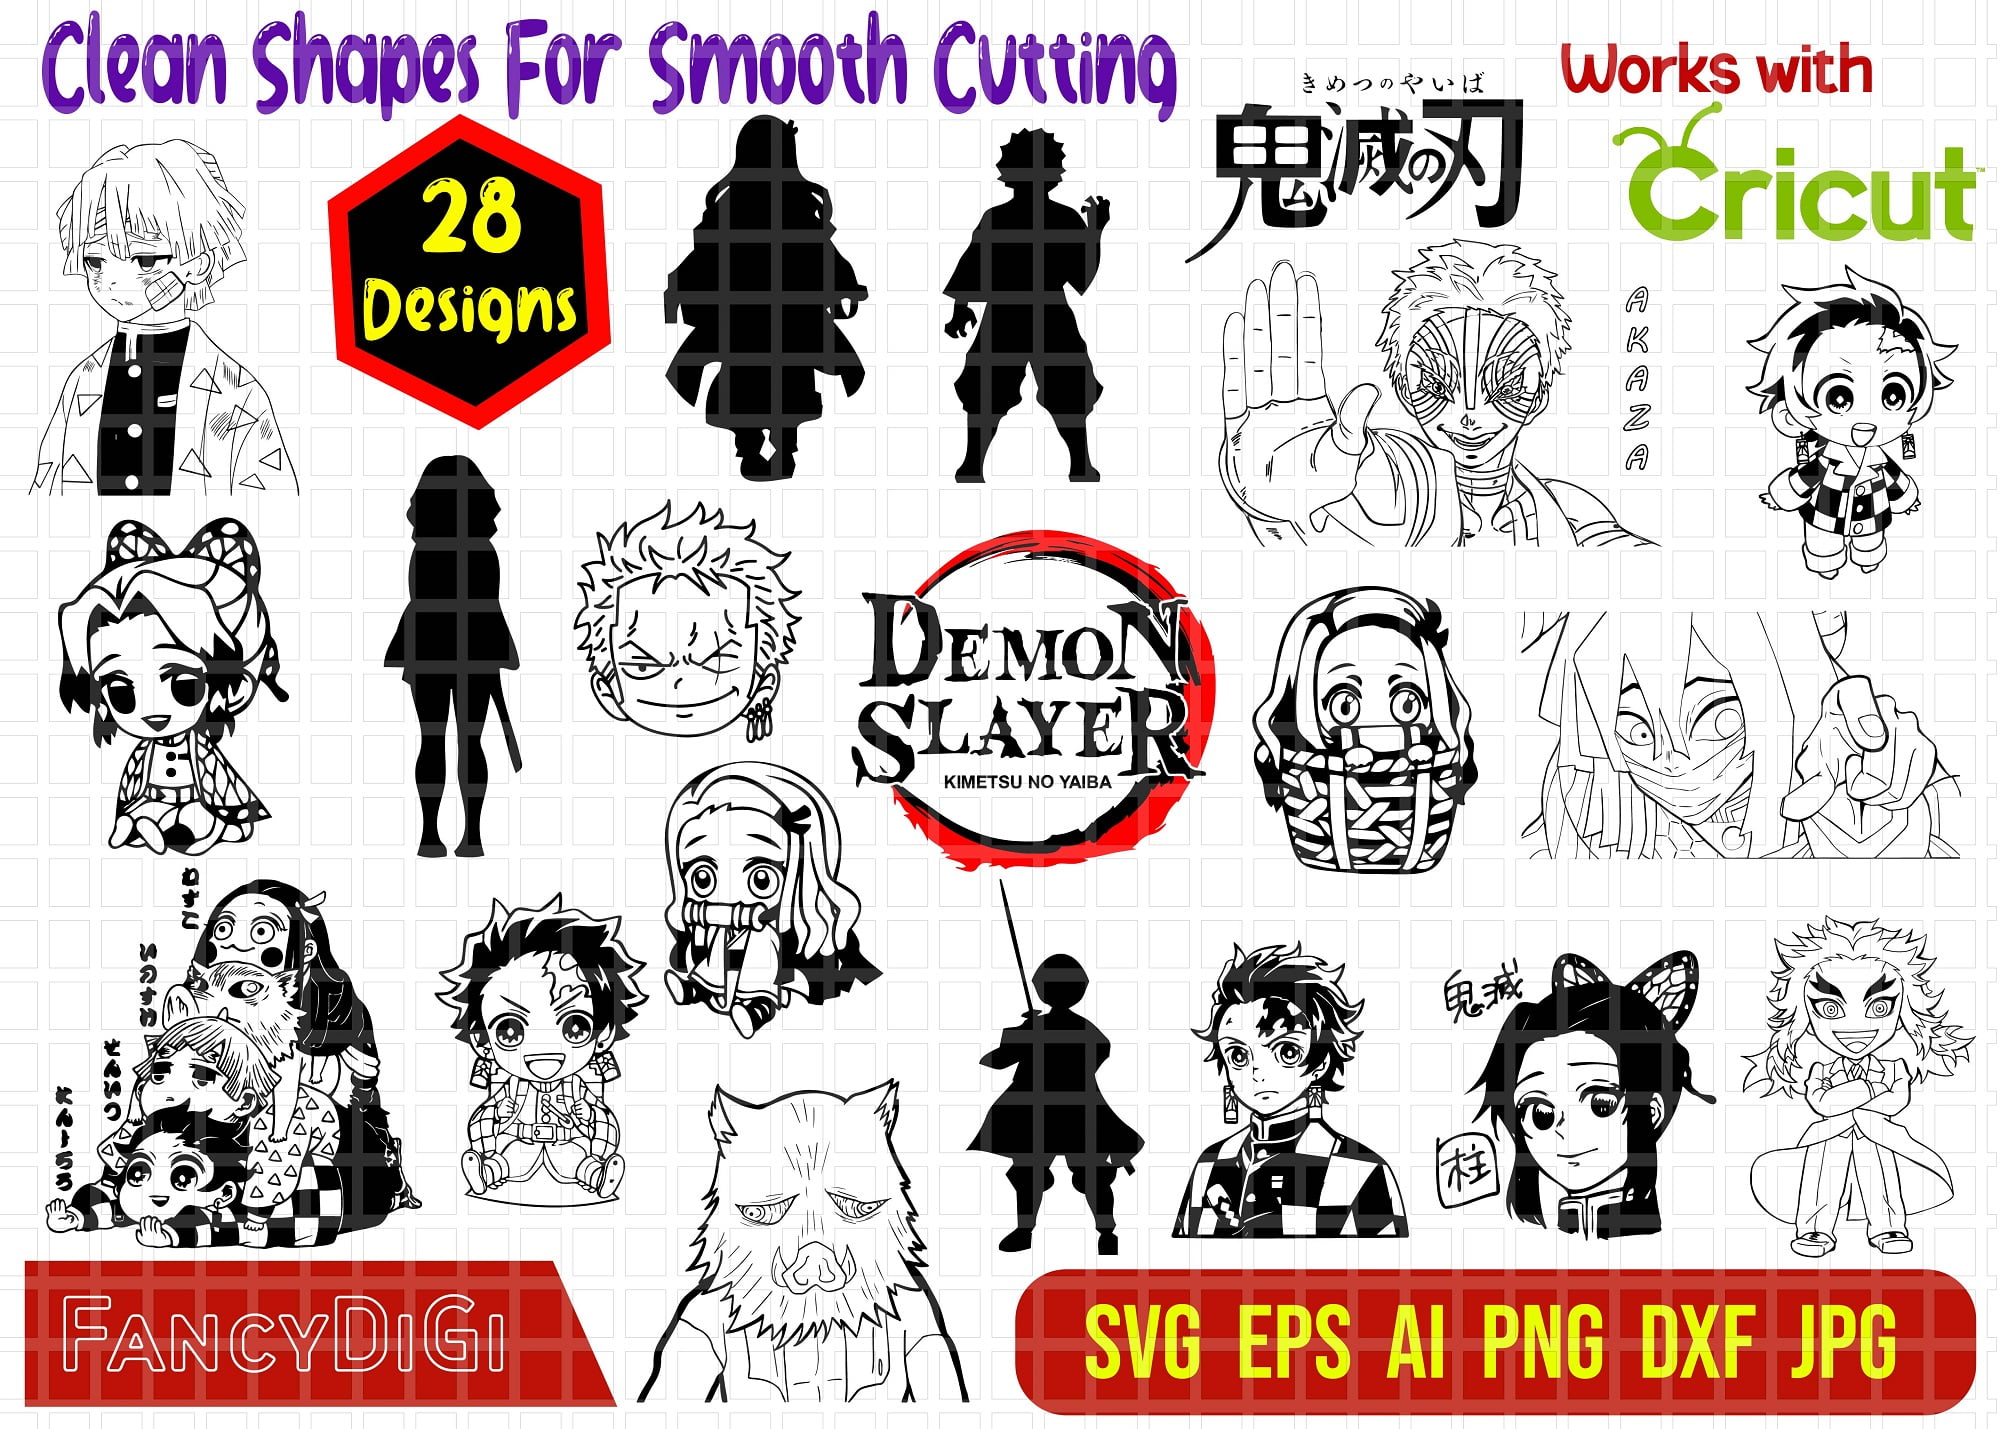 Free: SVG Vector clip art of anime girl with long hair - nohat.cc